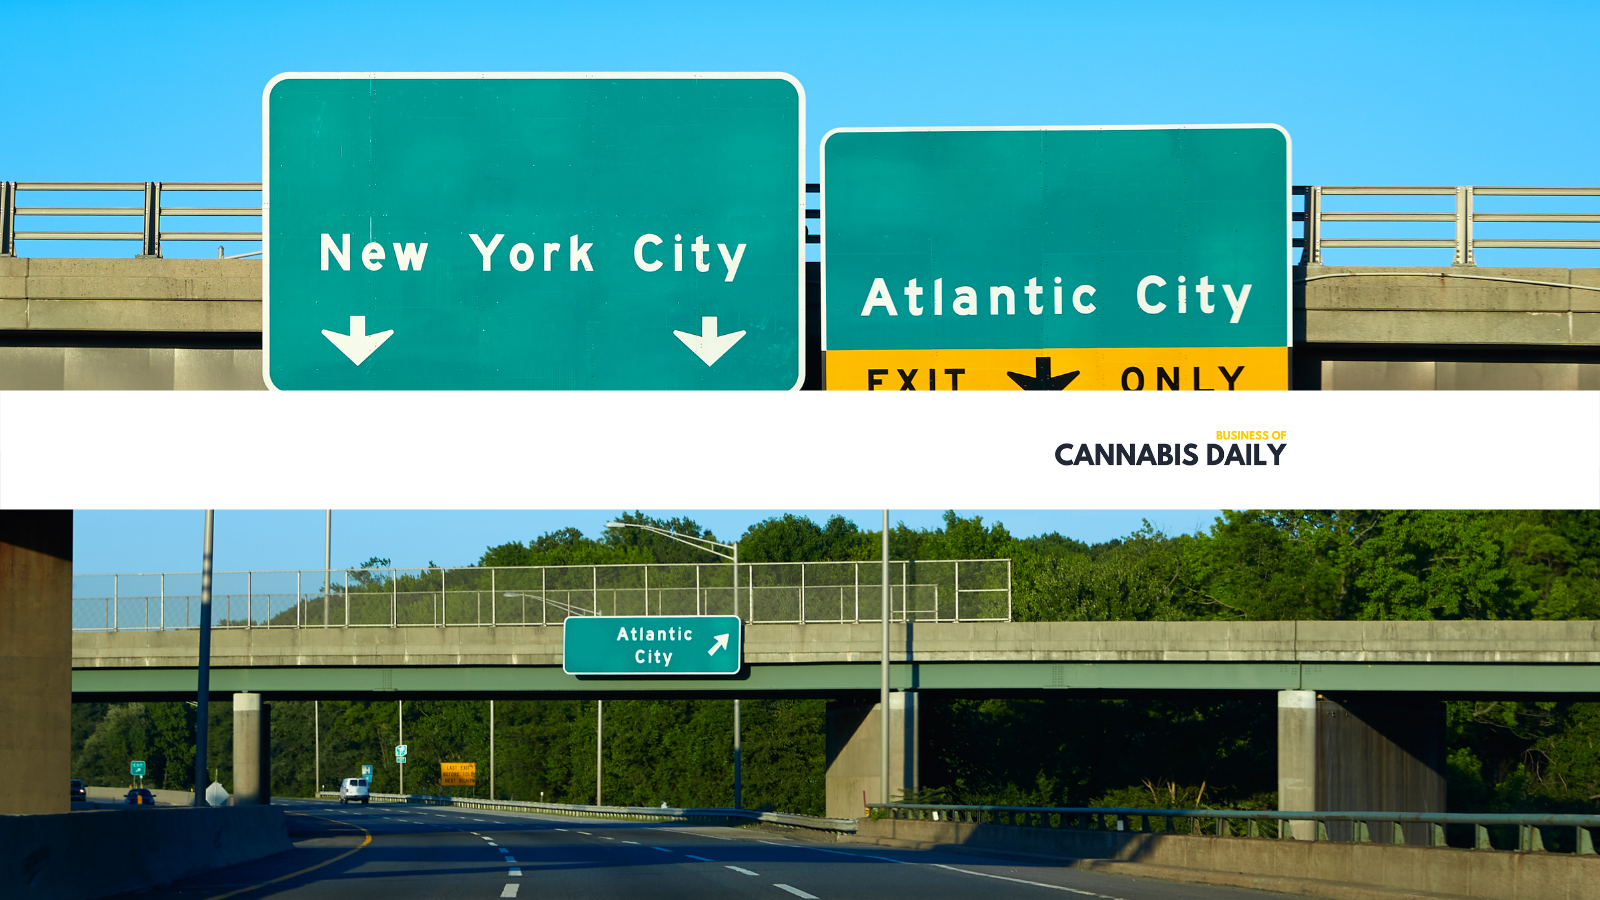 new jersey leads the cannabis news as they look to roll out adult use recreatIonal cannabis